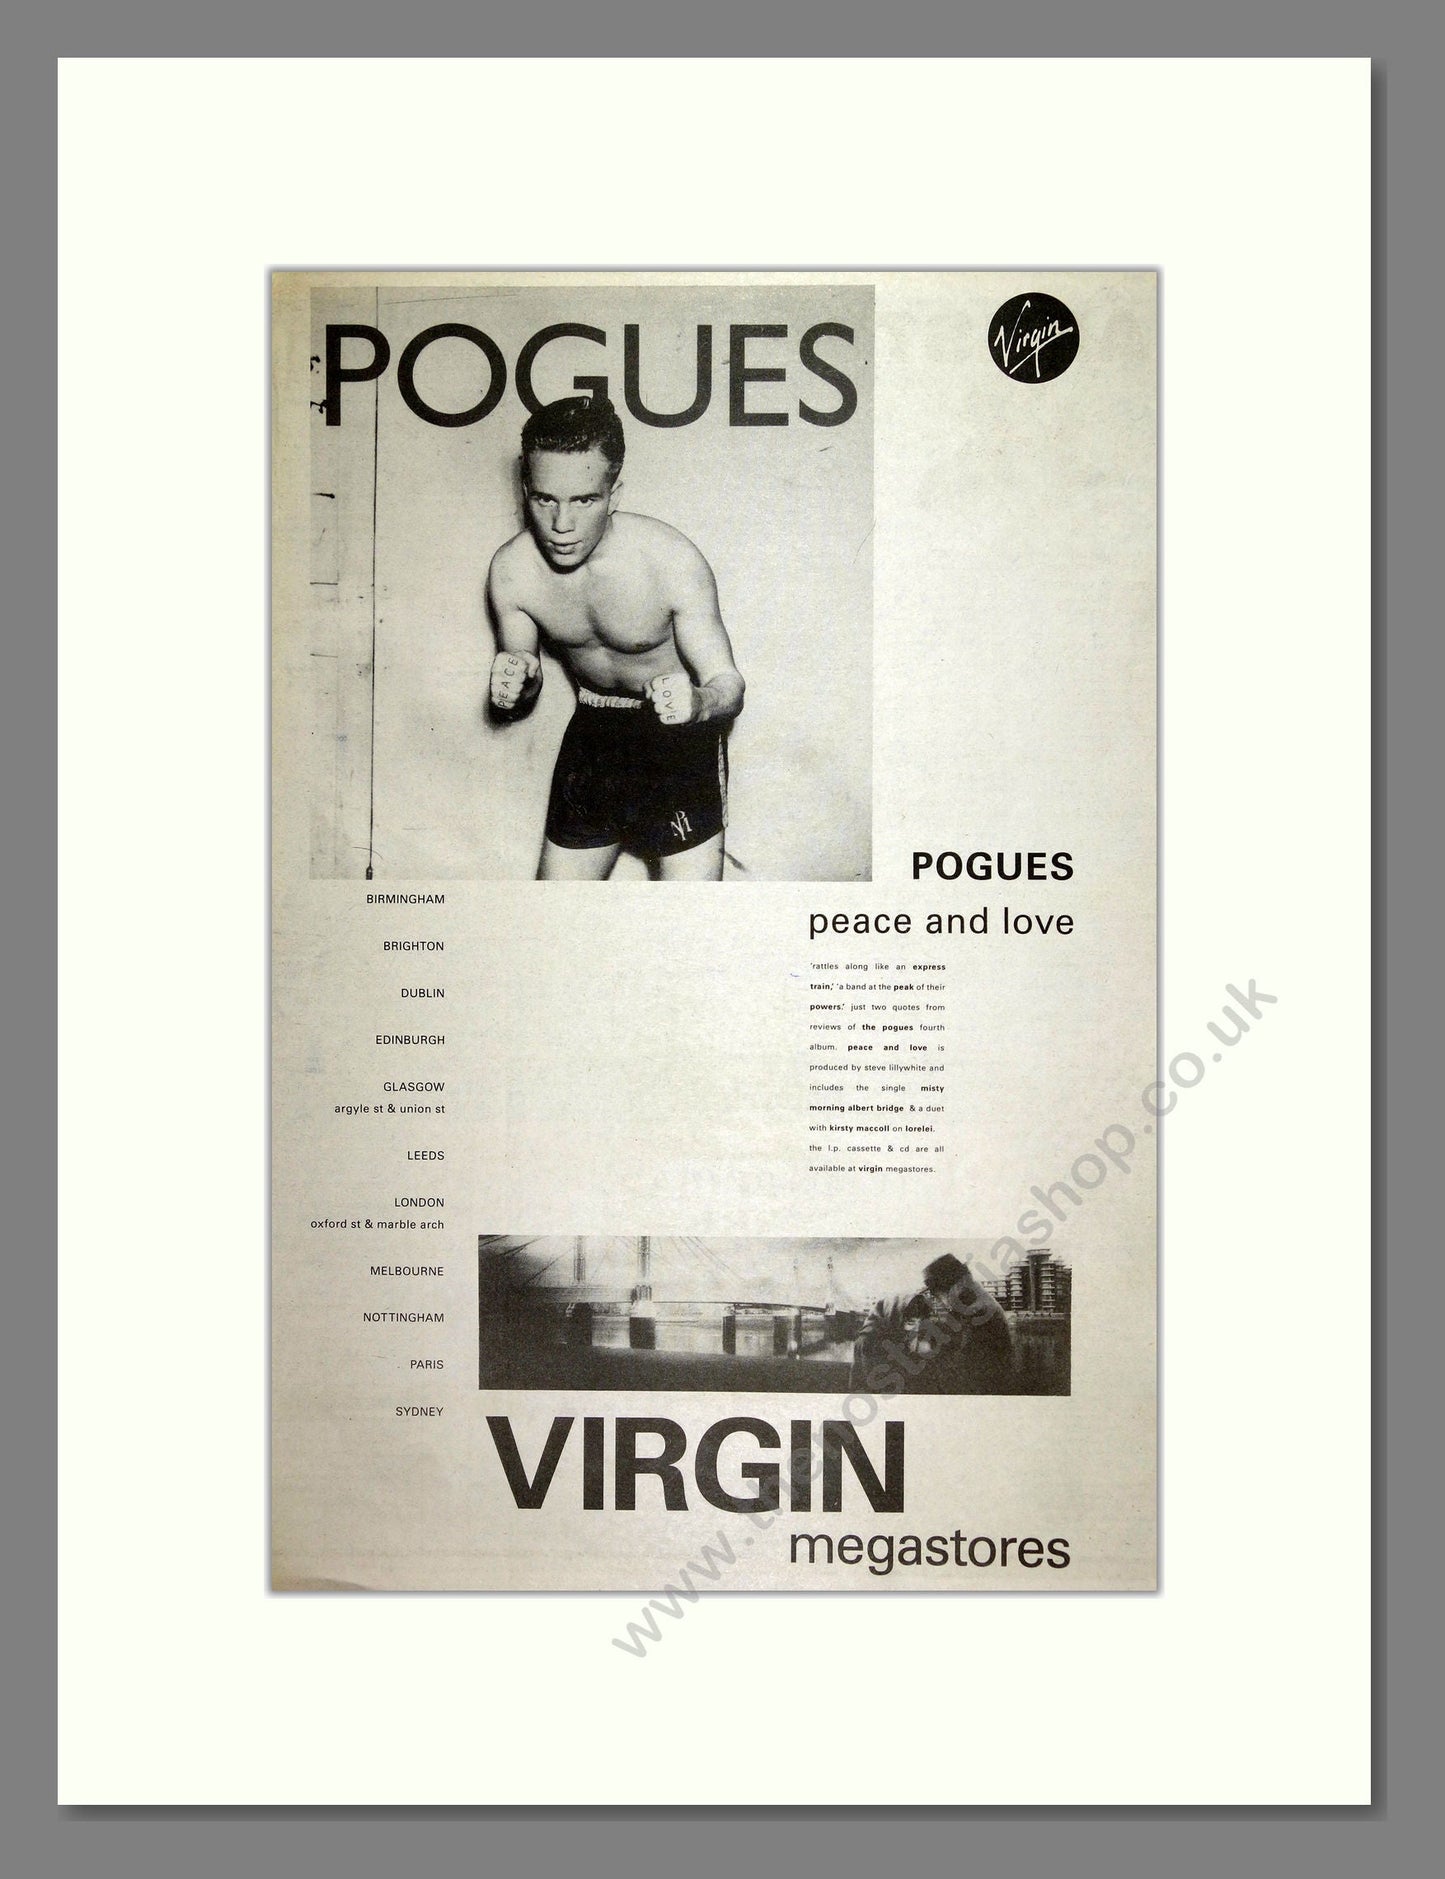 Pogues (The) - Peace and Love . Vintage Advert 1989 (ref AD16533)